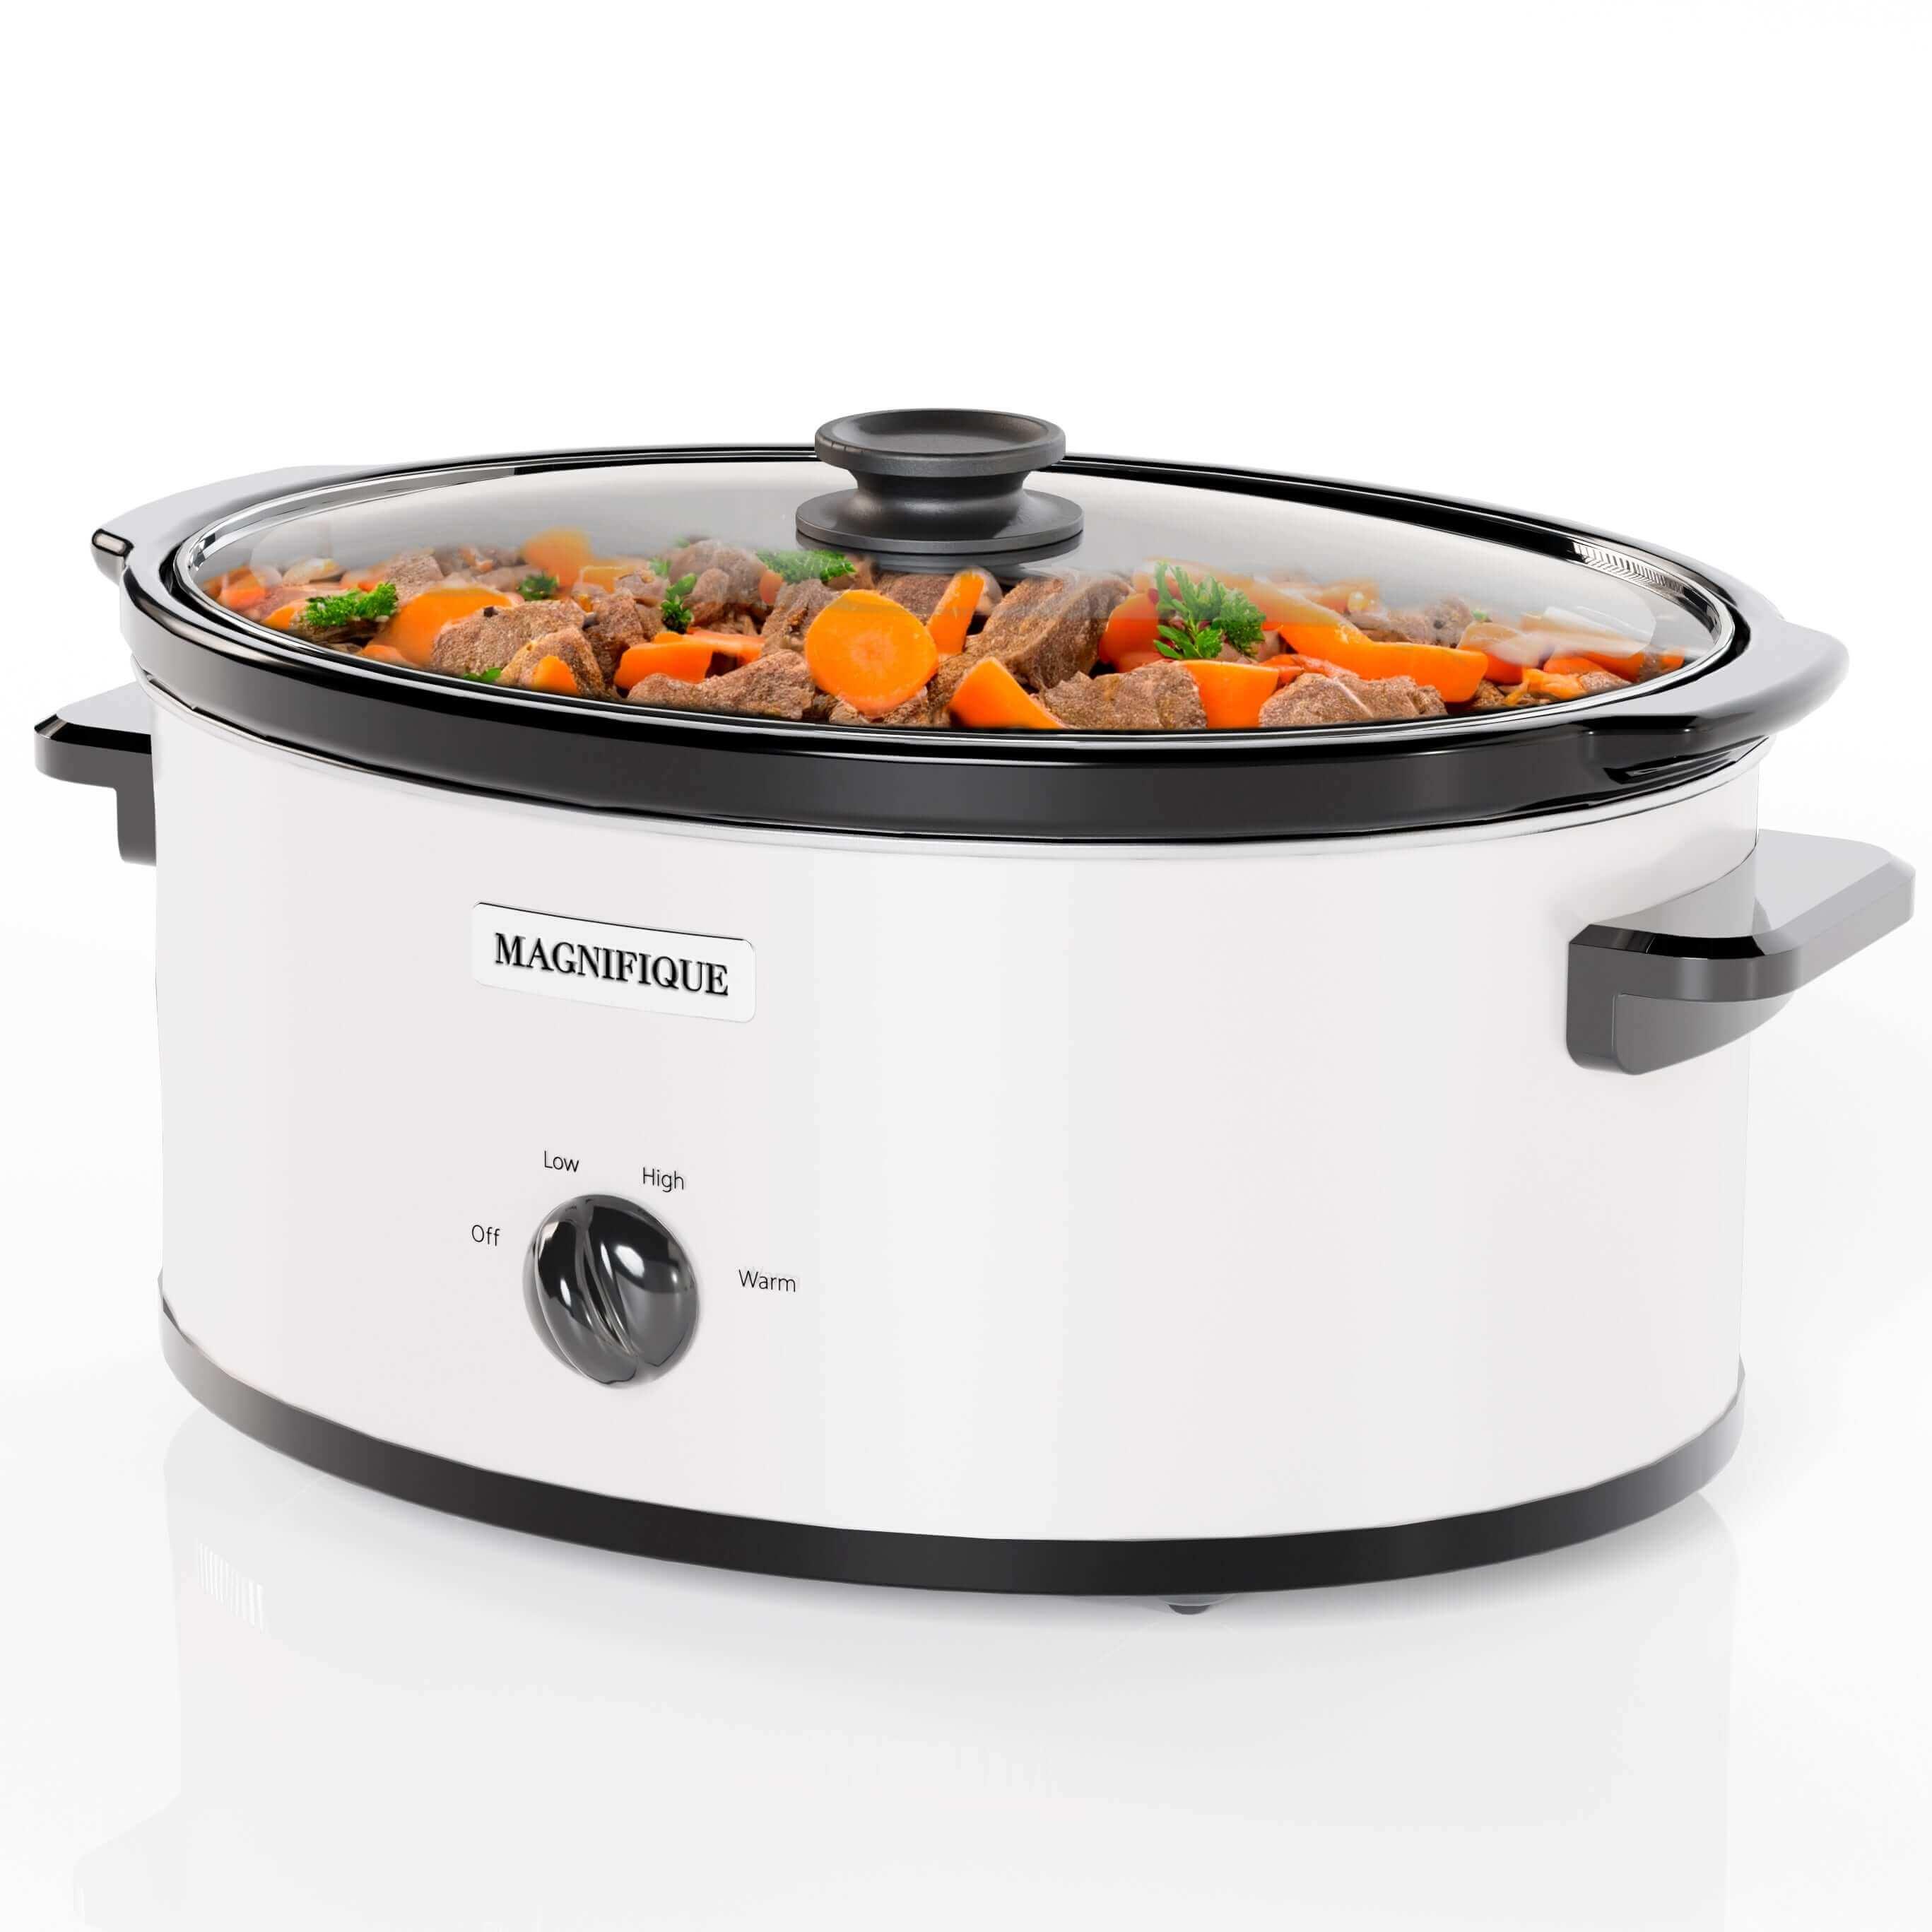 MAGNIFIQUE Oval Digital Slow Cooker with Keep Warm Setting - Perfect  Kitchen Small Appliance for Family Dinners (Stainless Steel Manual, 8 Qt)